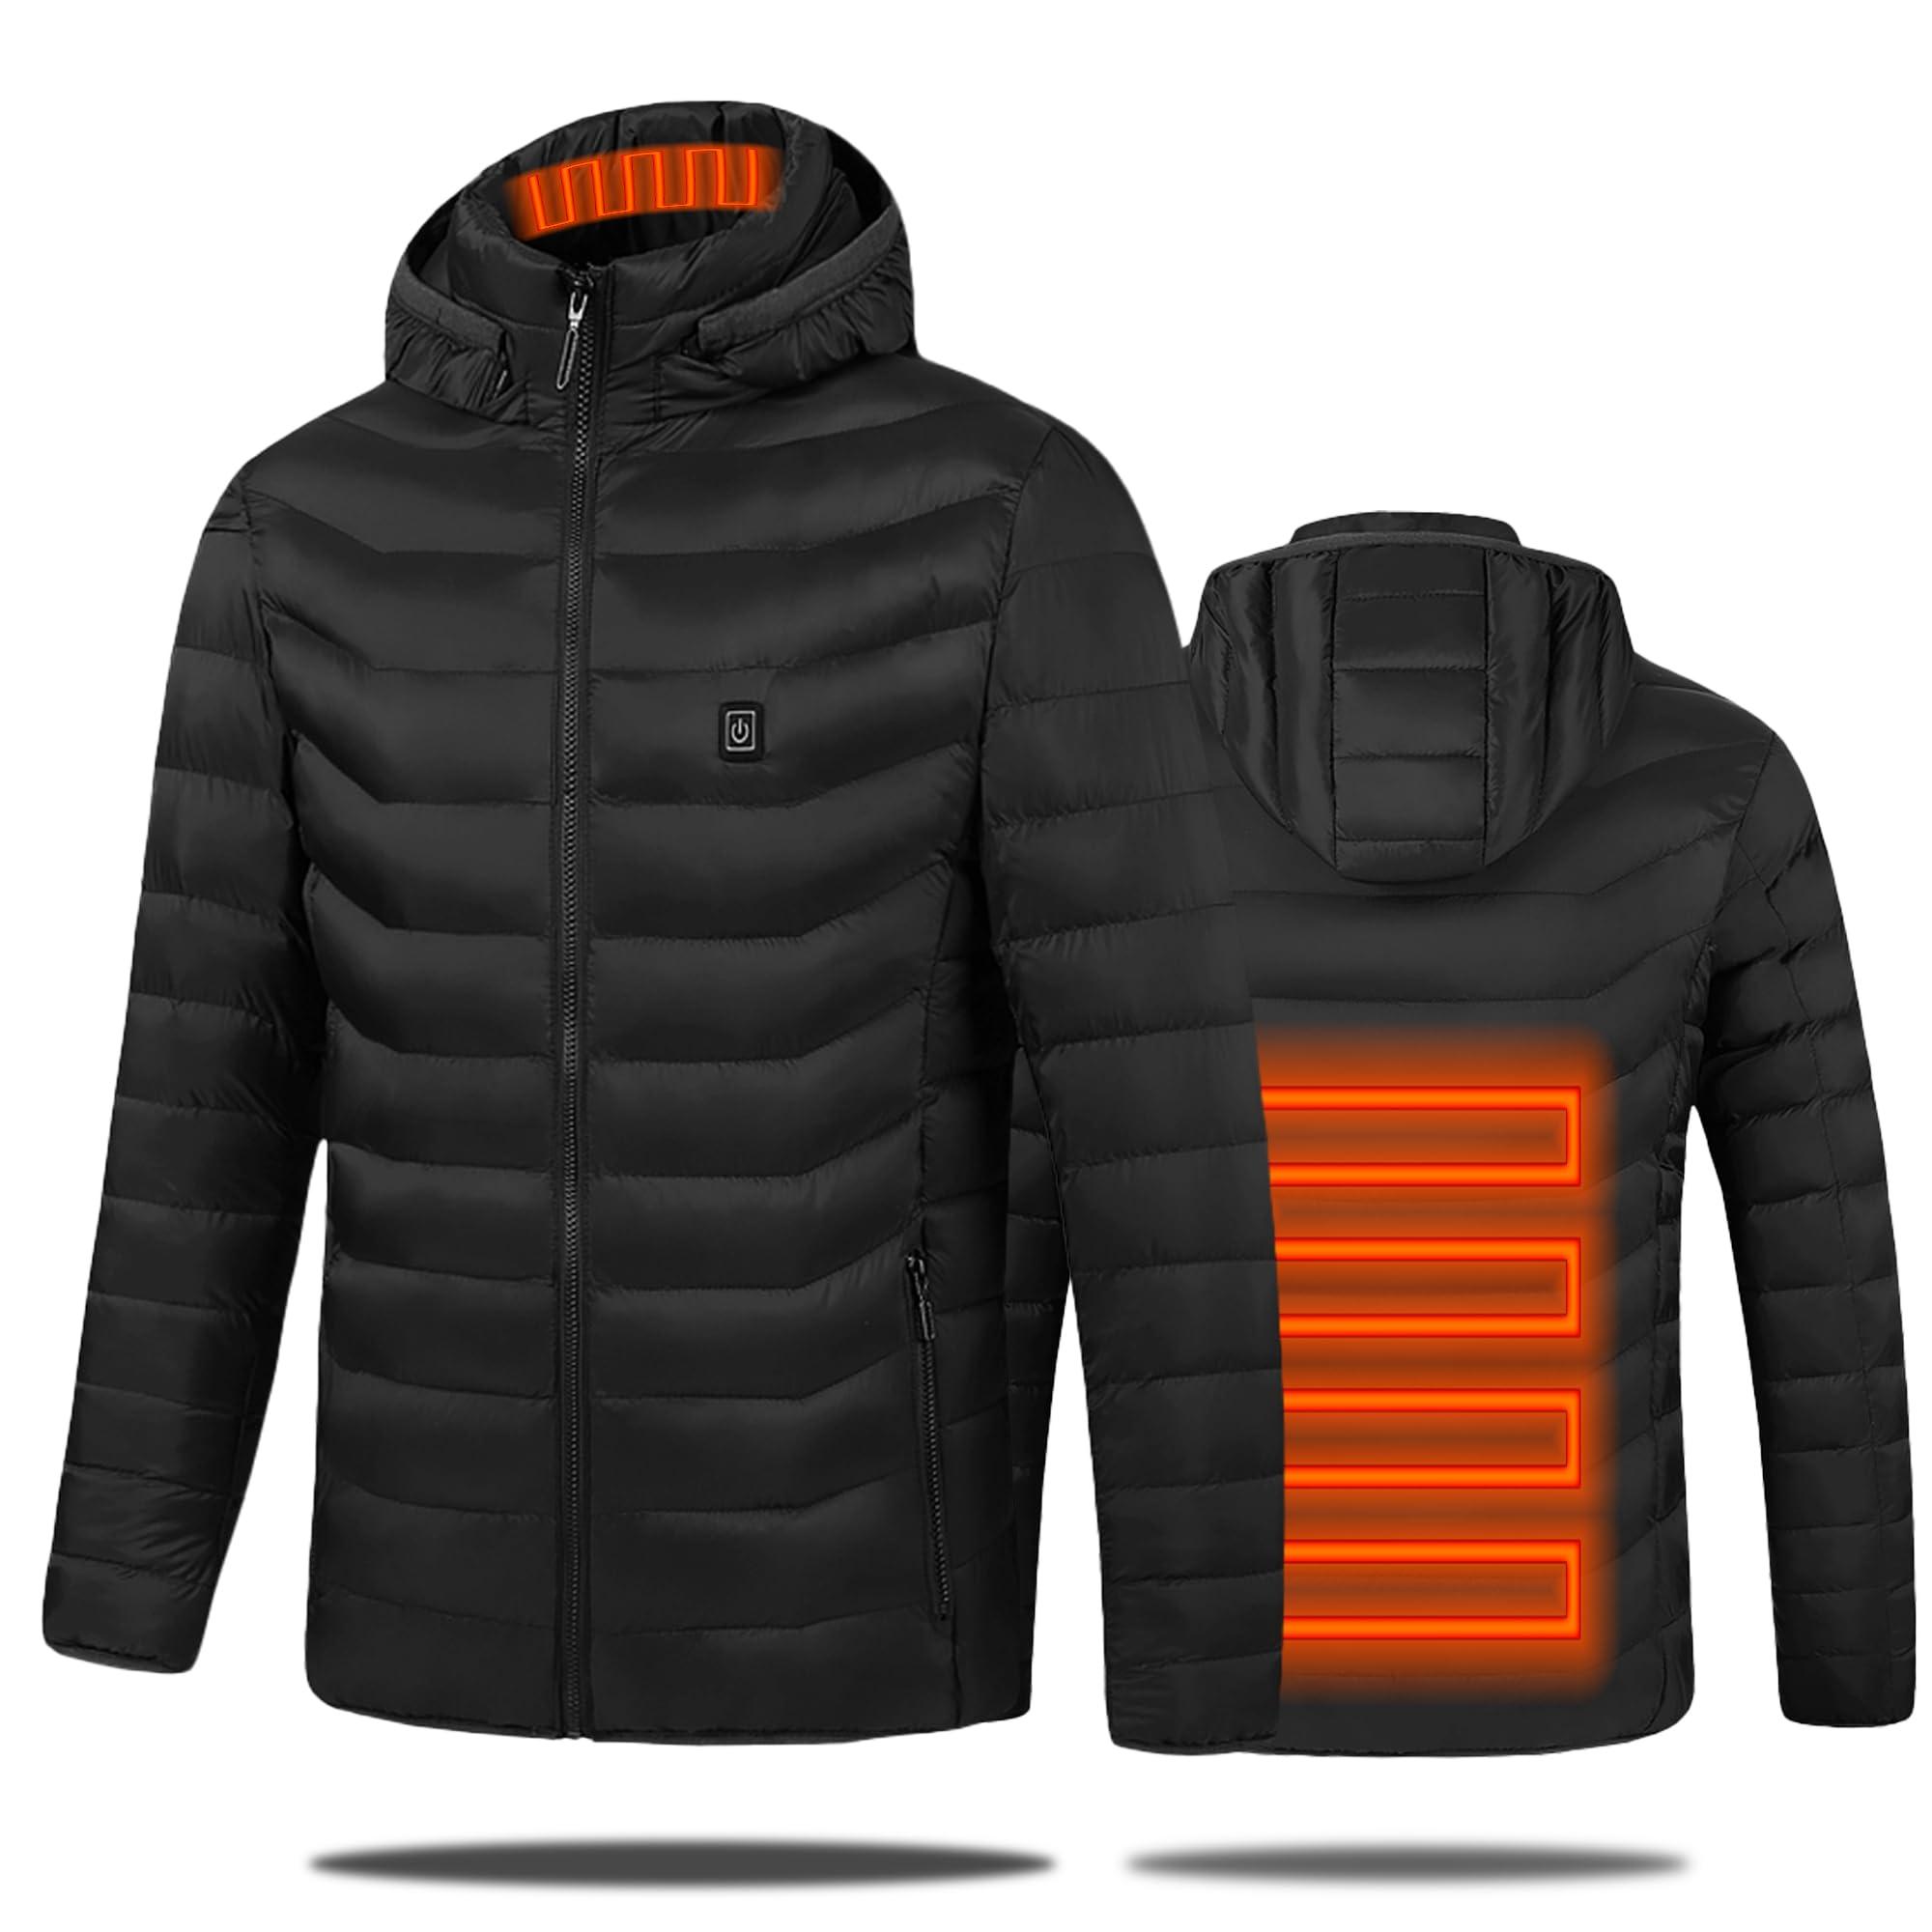 JC Gens Men’s Heated Jacket Electric Heated Jacket with 3 Adjustable Heating Levels 2 Heating Zones Lightweight Flexible Warming Jacket for Winter Outdoor Skiing Camping Hiking (Single Switch,SIZE M)